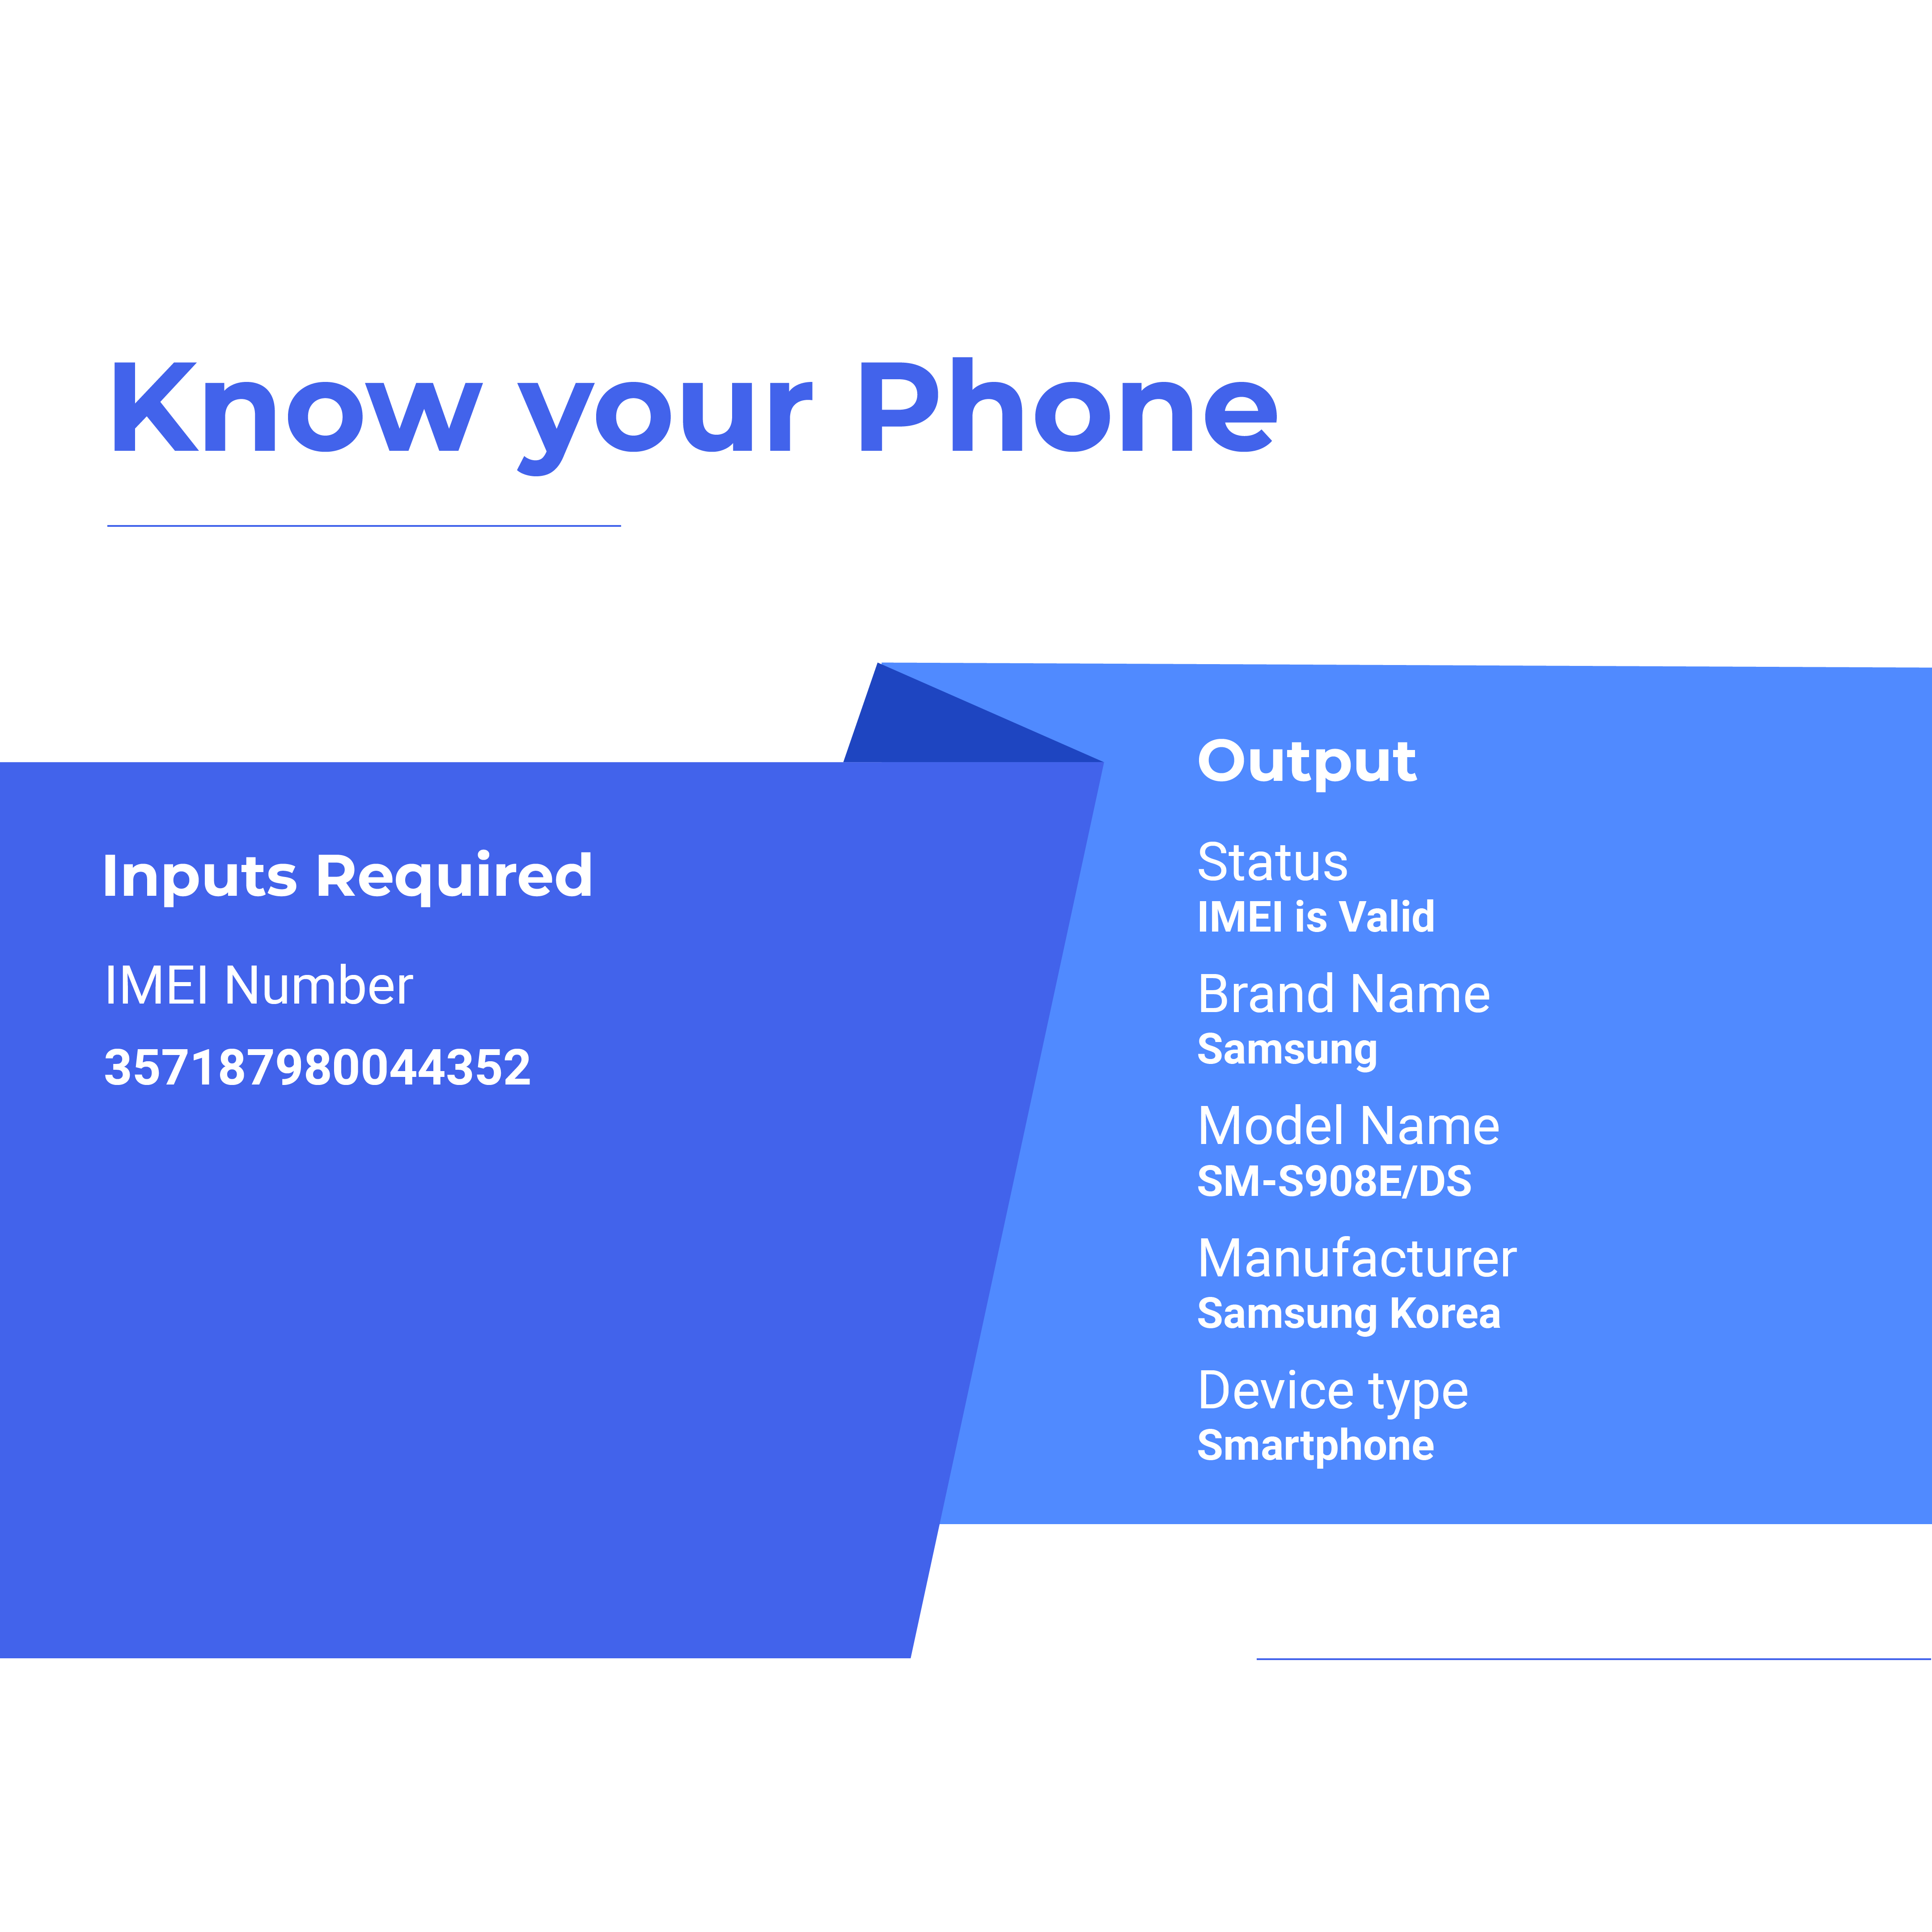 Know your Phone API